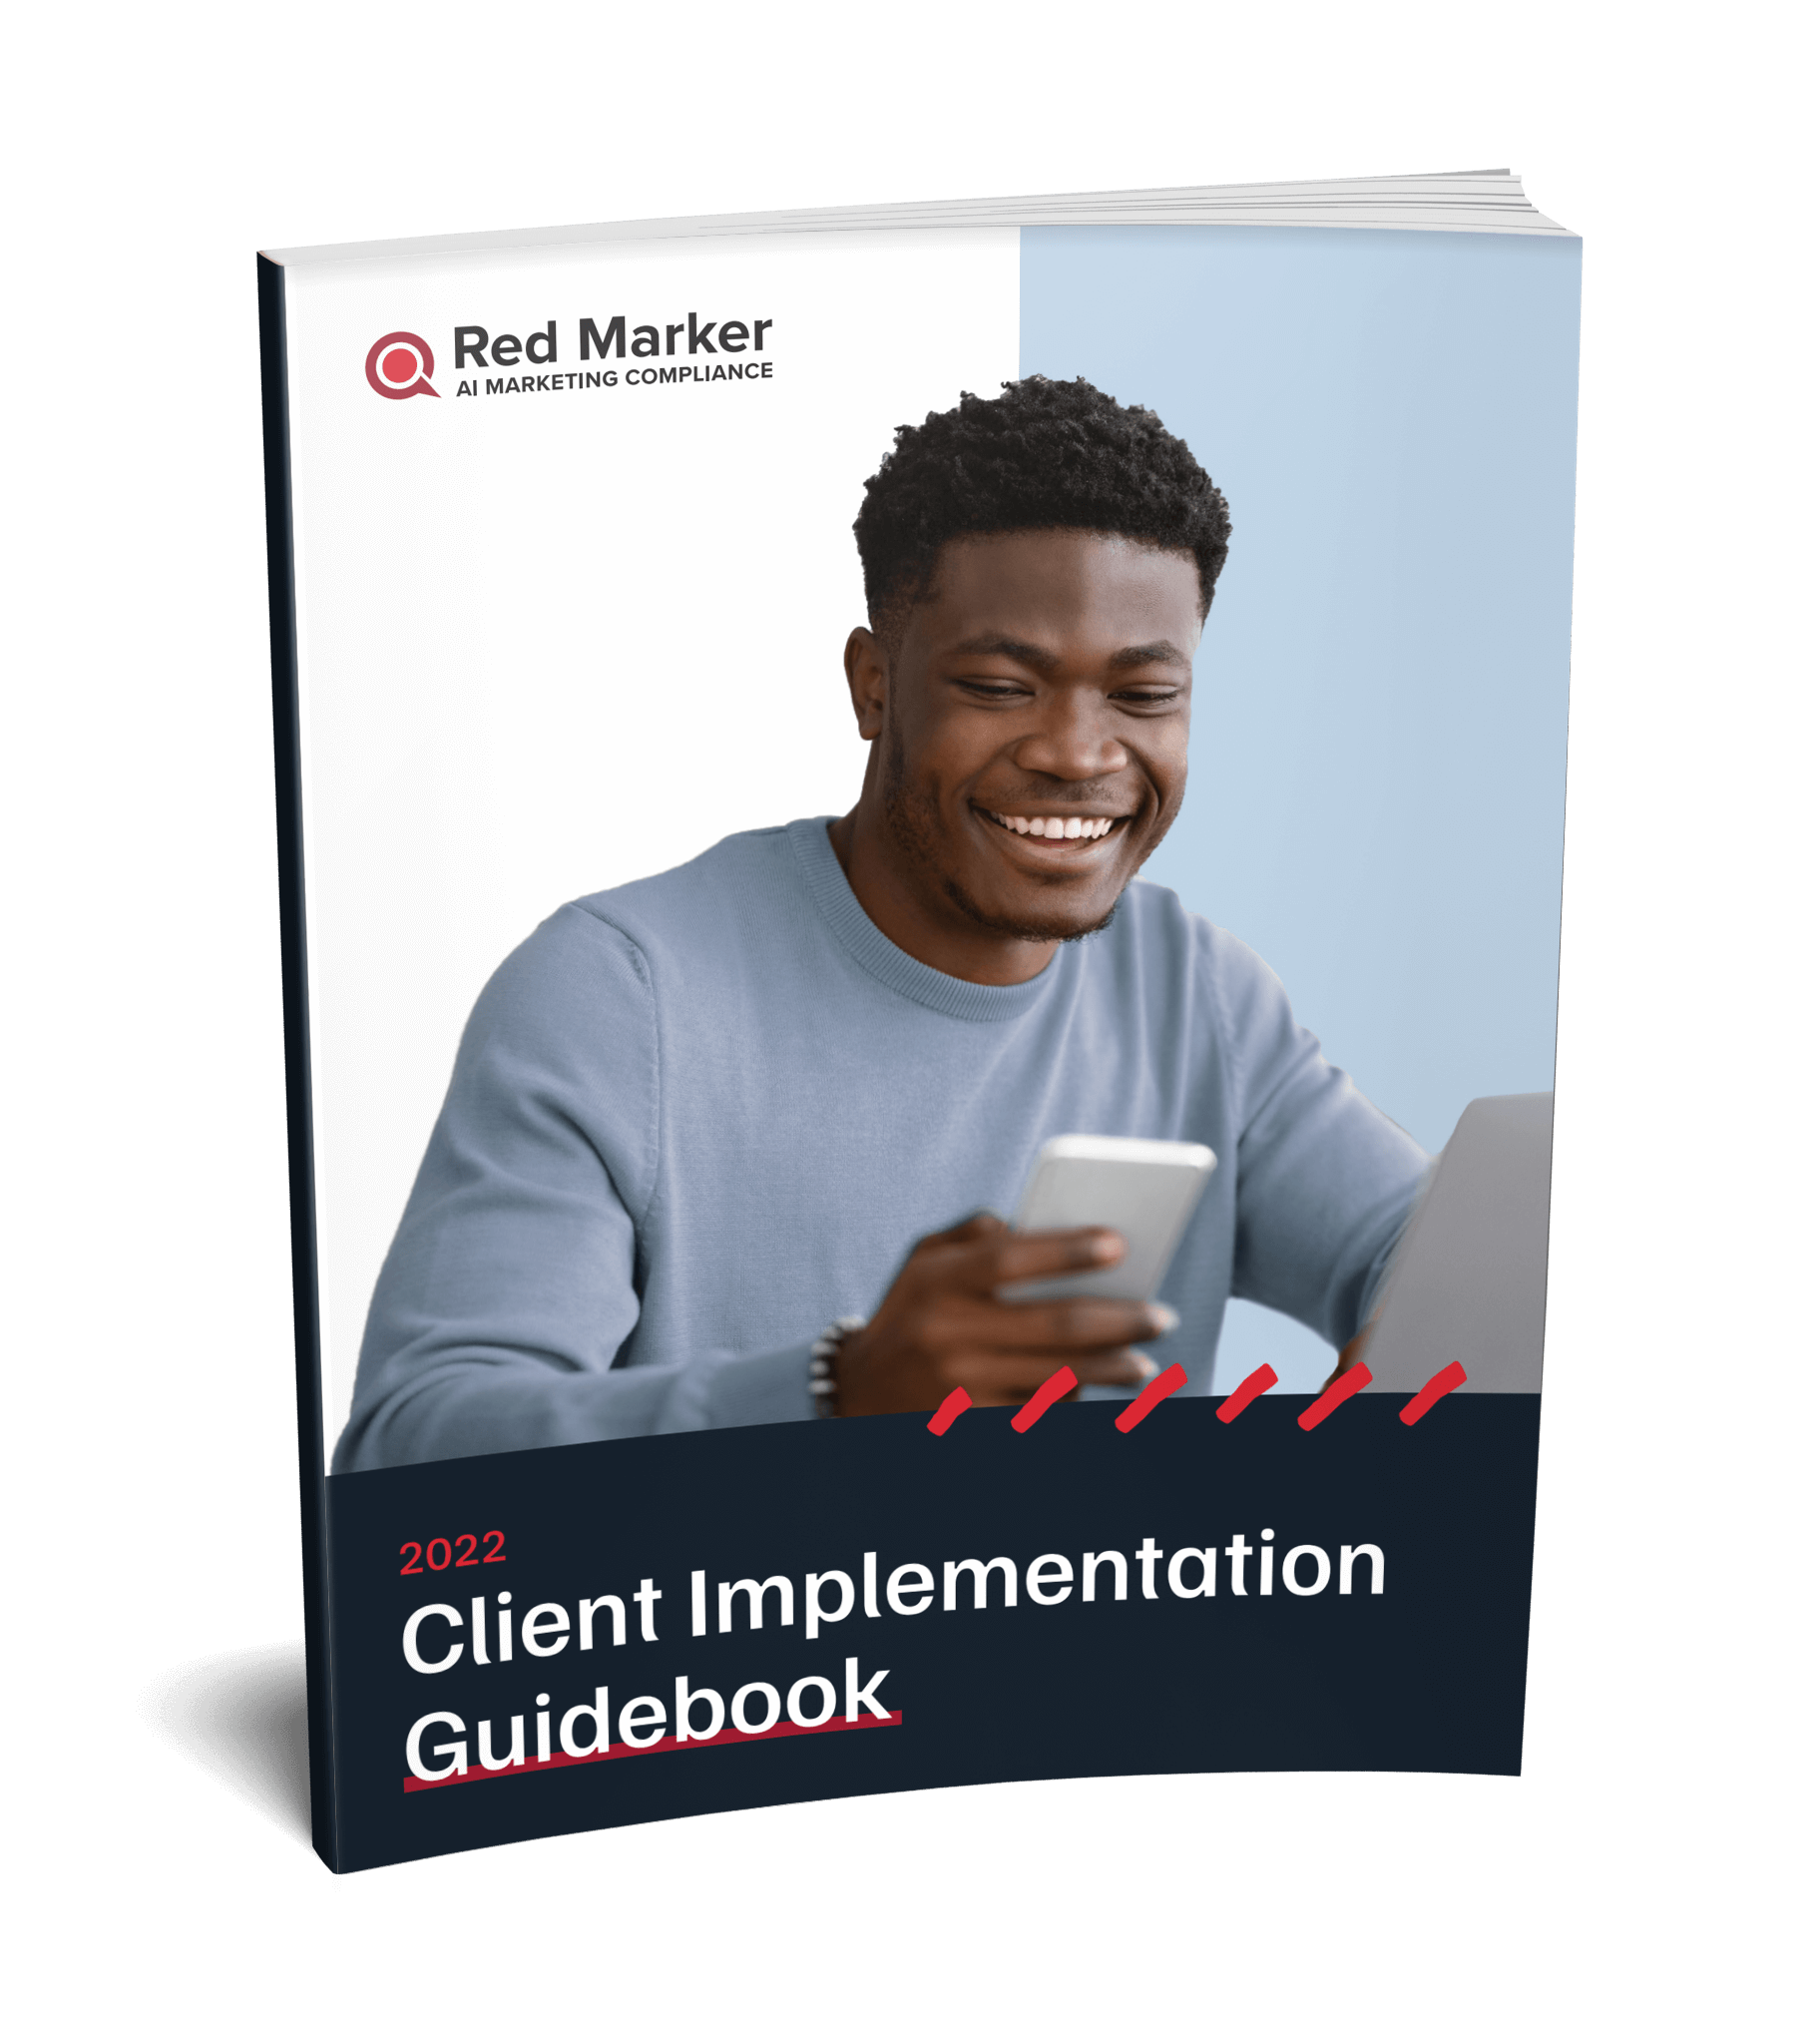 The Buyer's Guide to Marketing Compliance Software